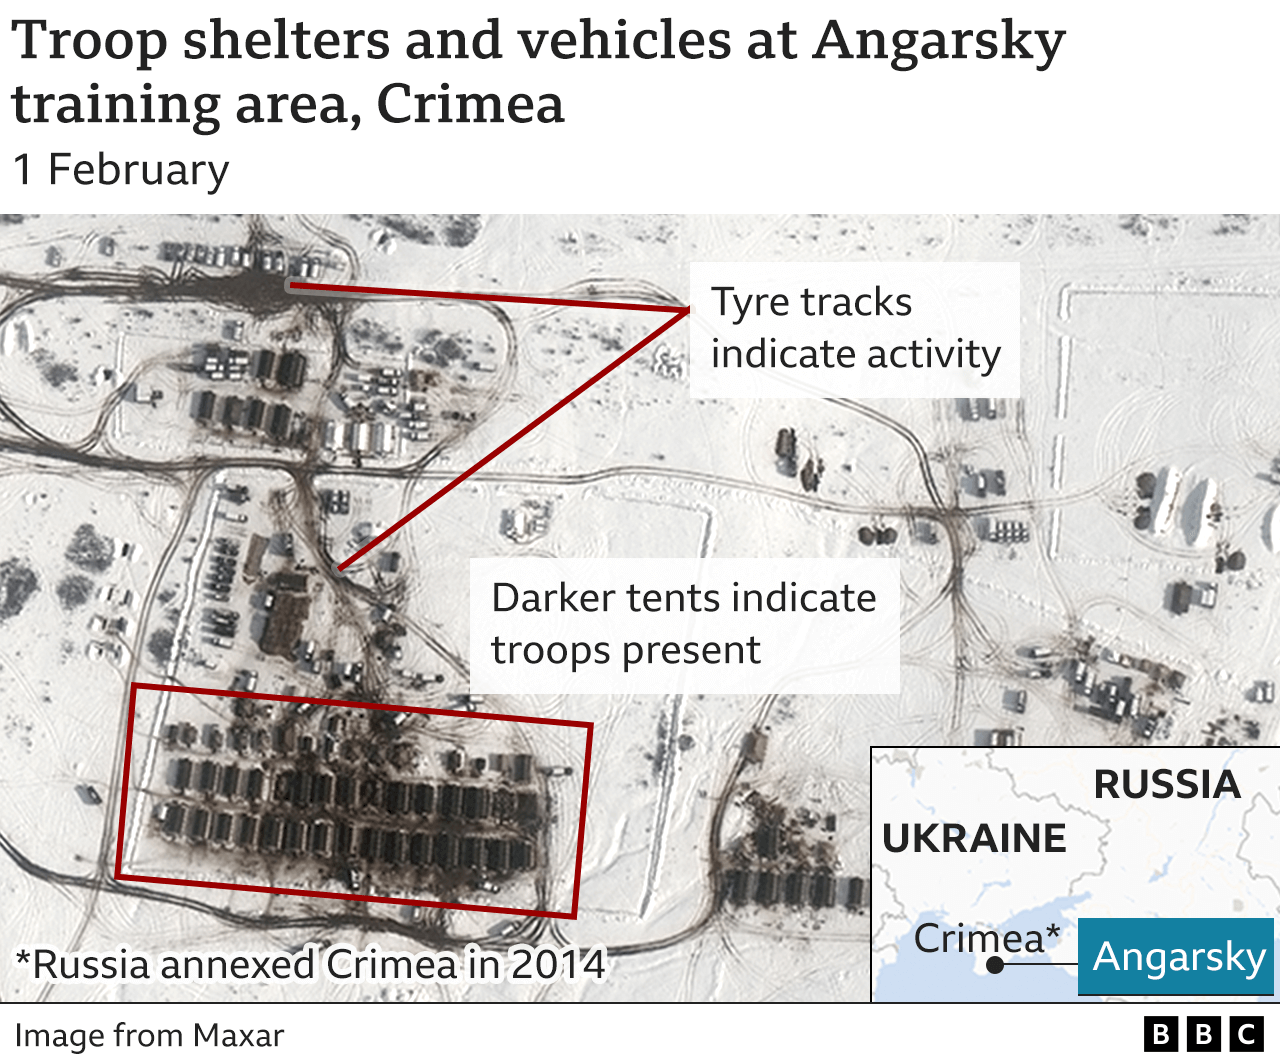 Satellite image showing troop shelters and vehicles in Crimea.